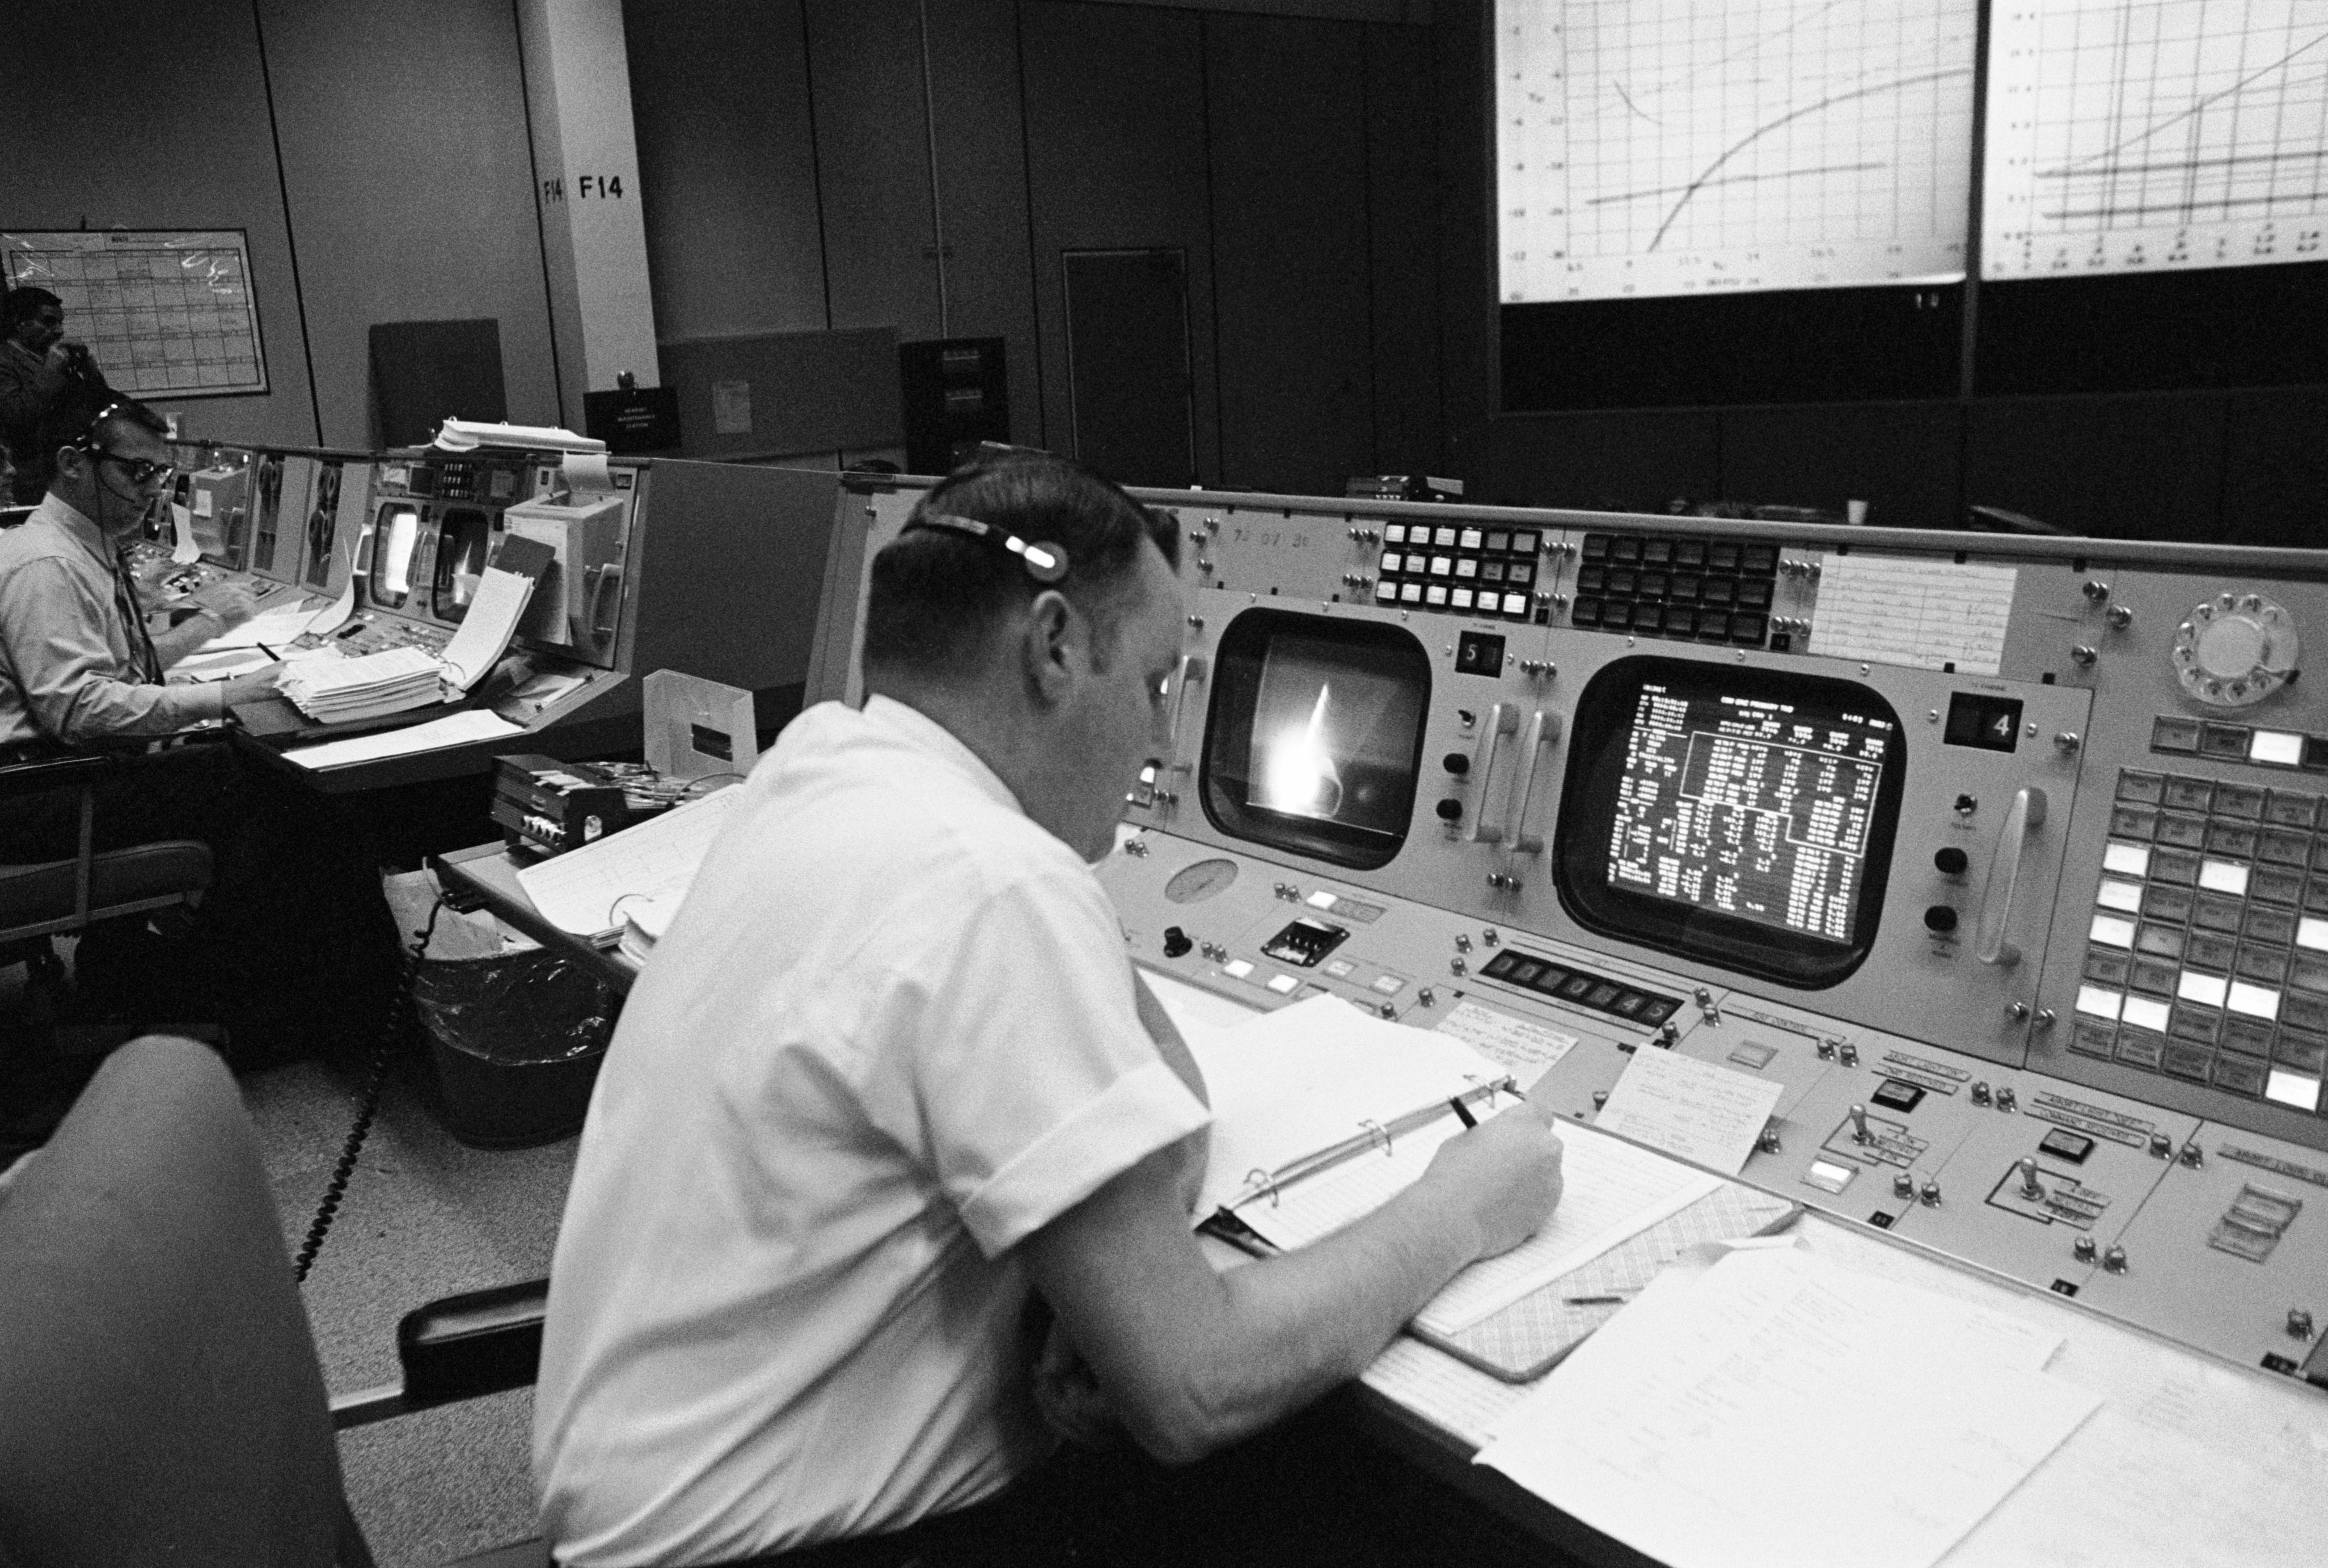 Cliff Charlesworth at his console during the Apollo 8 lunar mission, 21. December 1968